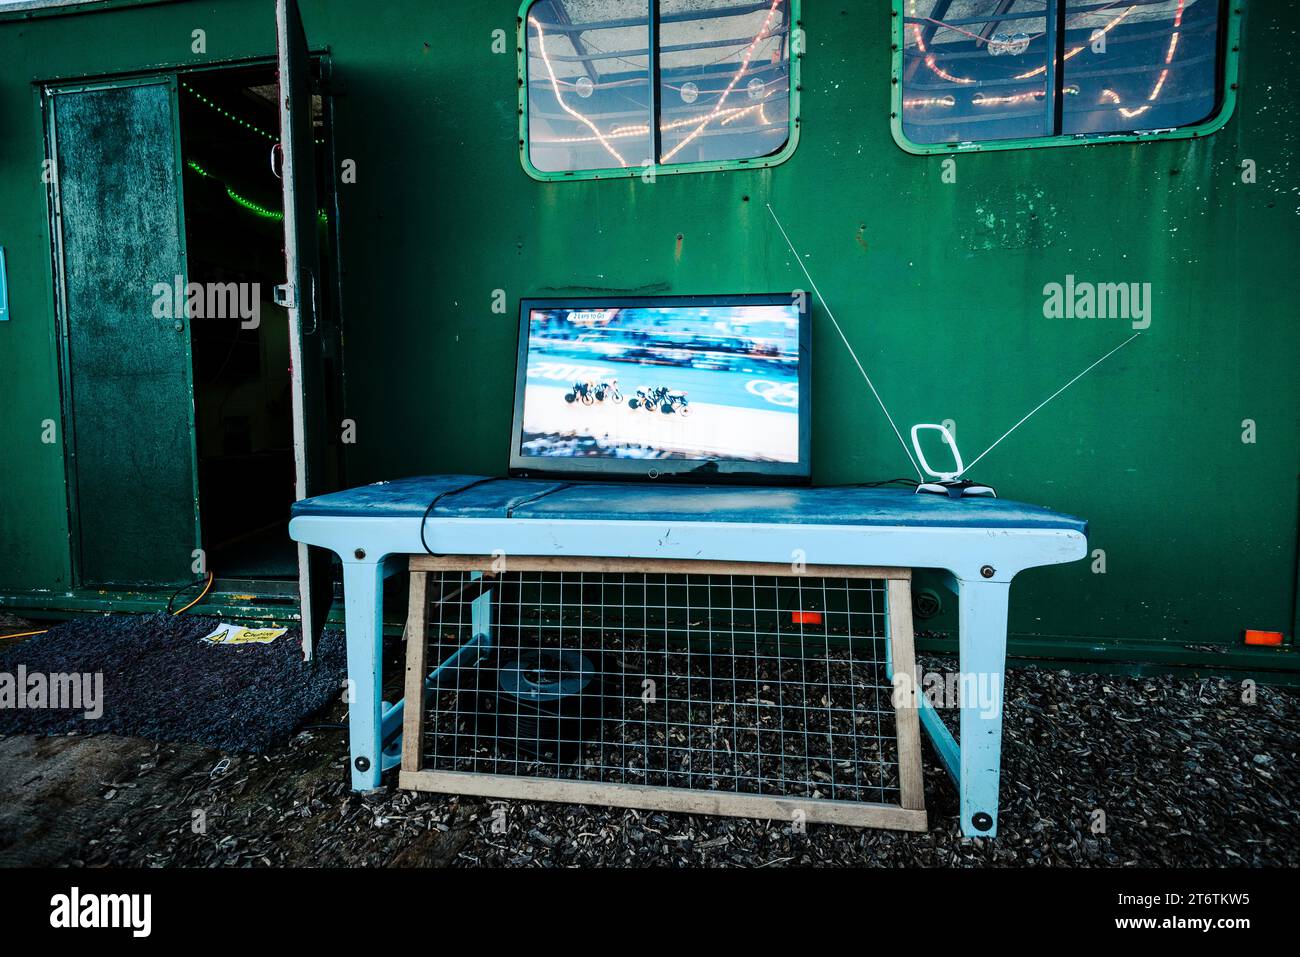 An old flat TV sits on a table outside a green hut at a campsite in West Wales UK Stock Photo